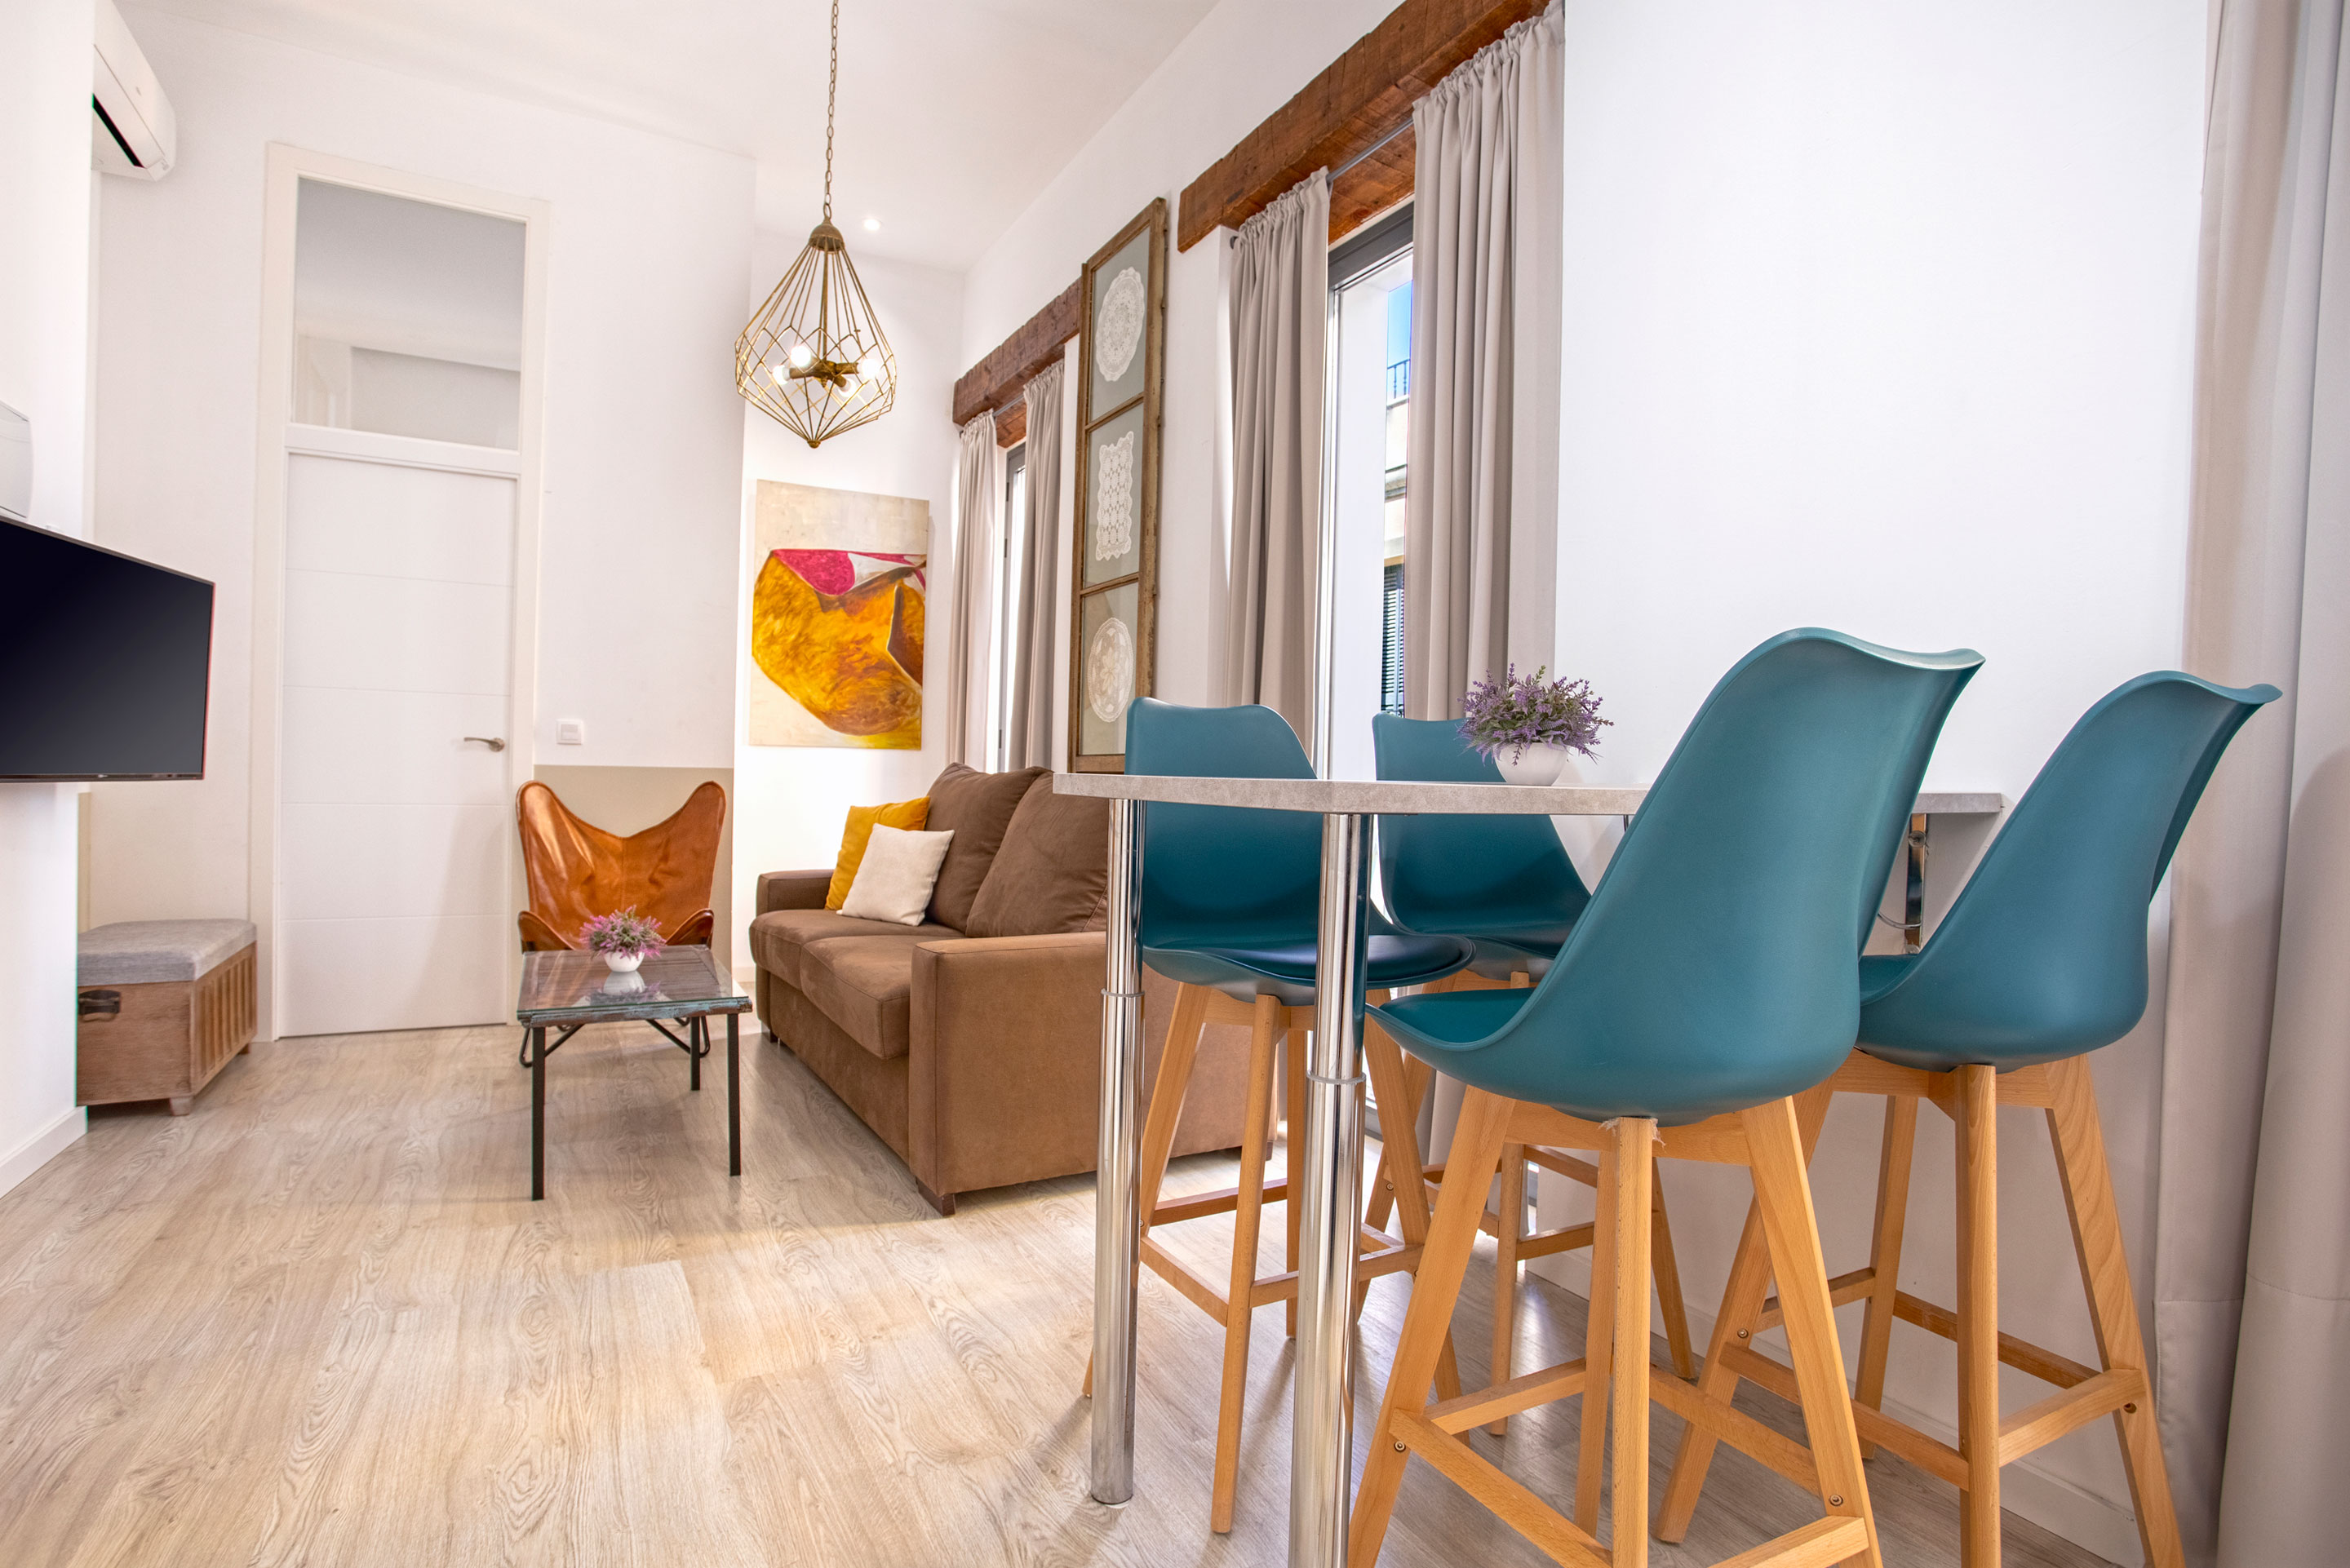 Property Image 1 - Cozy apartment in the heart of city. Acanthus IV